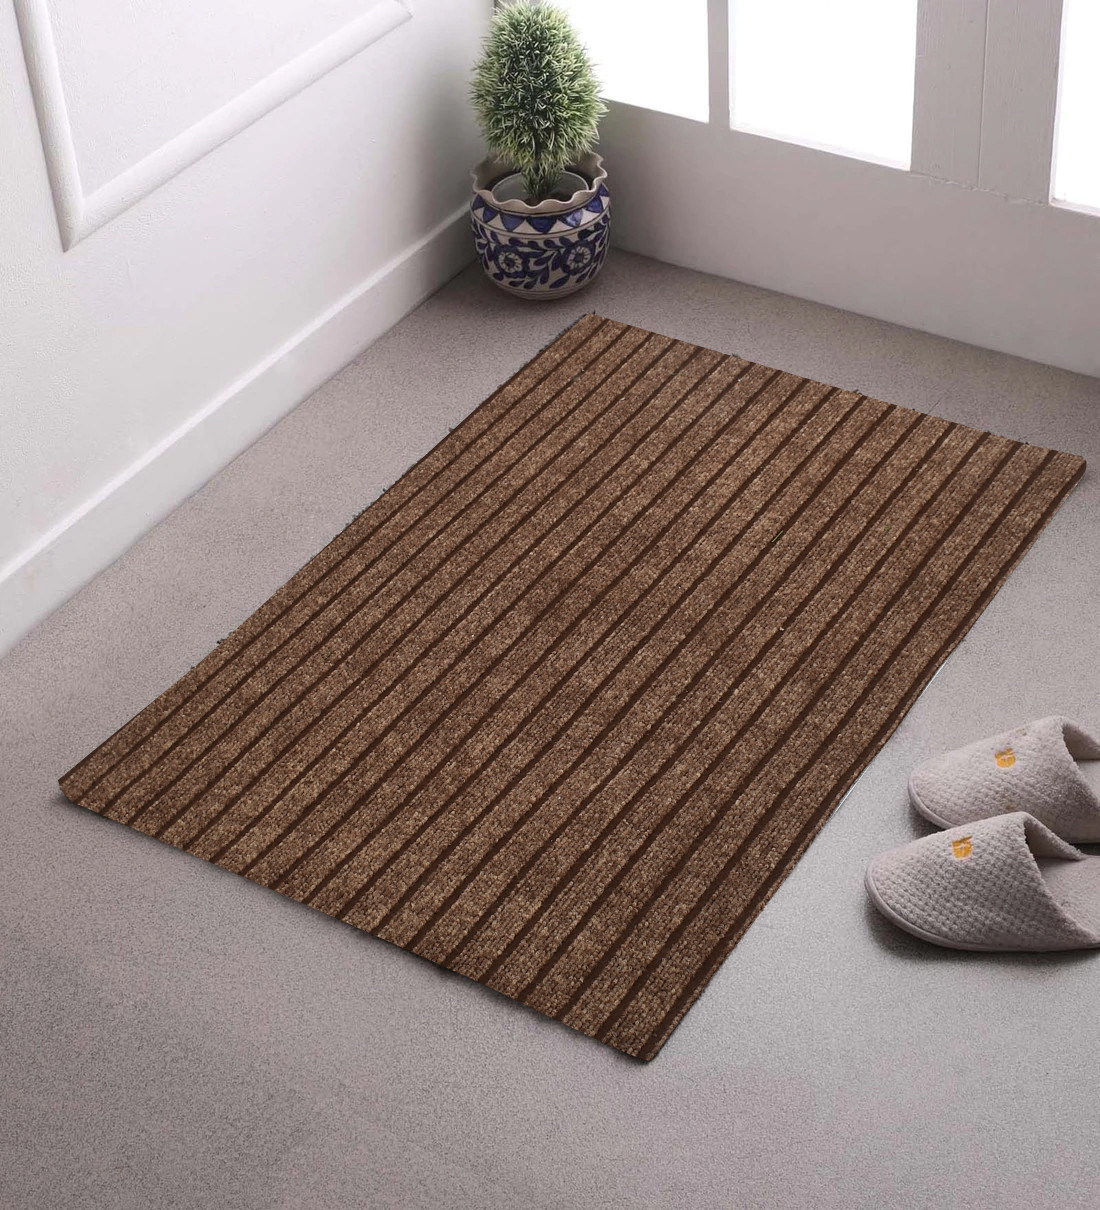 Kuber Industries All Weather Entry and Back Yard Door Mat, Non-Slip Rubber Backing, Absorbent and Waterproof, Dirt Trapping Rugs for Entryway- Pack of 2 -16